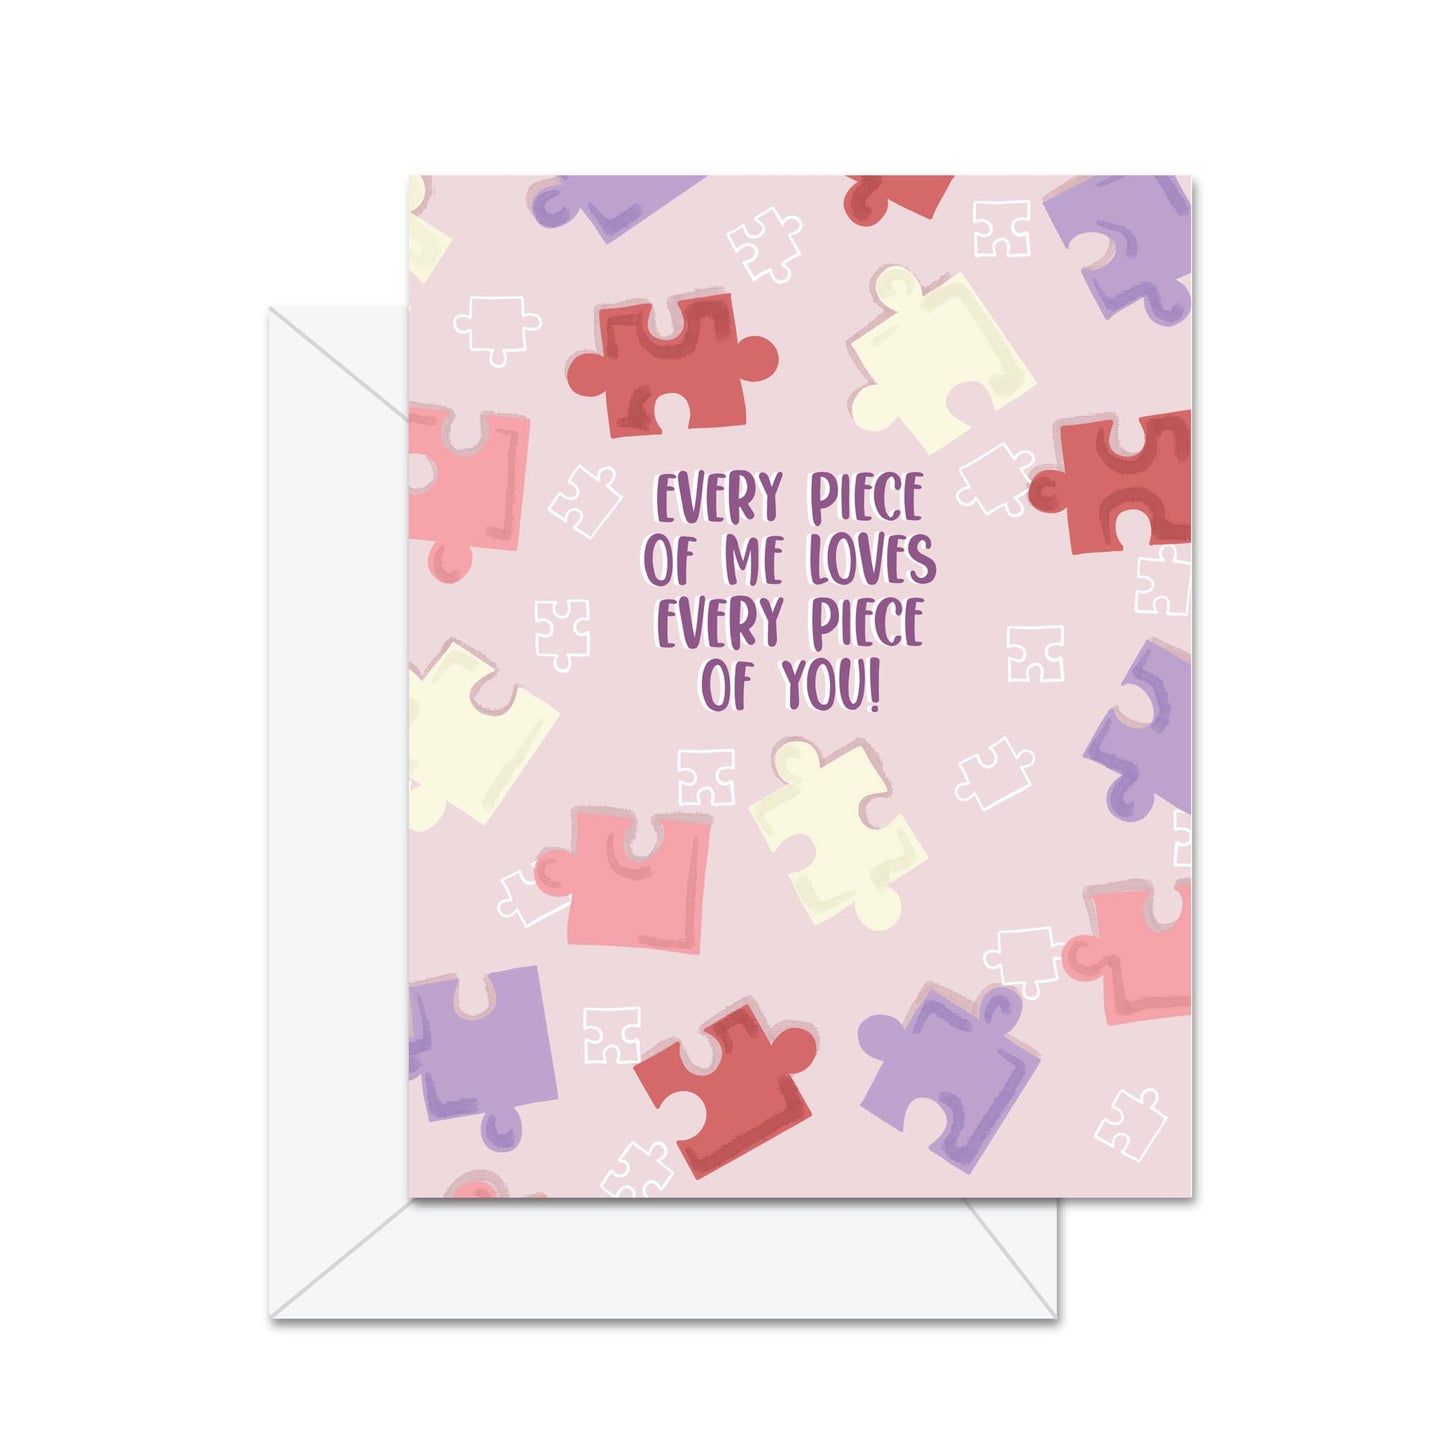 Every Piece of Me Loves Every Piece of You! - Greeting Card